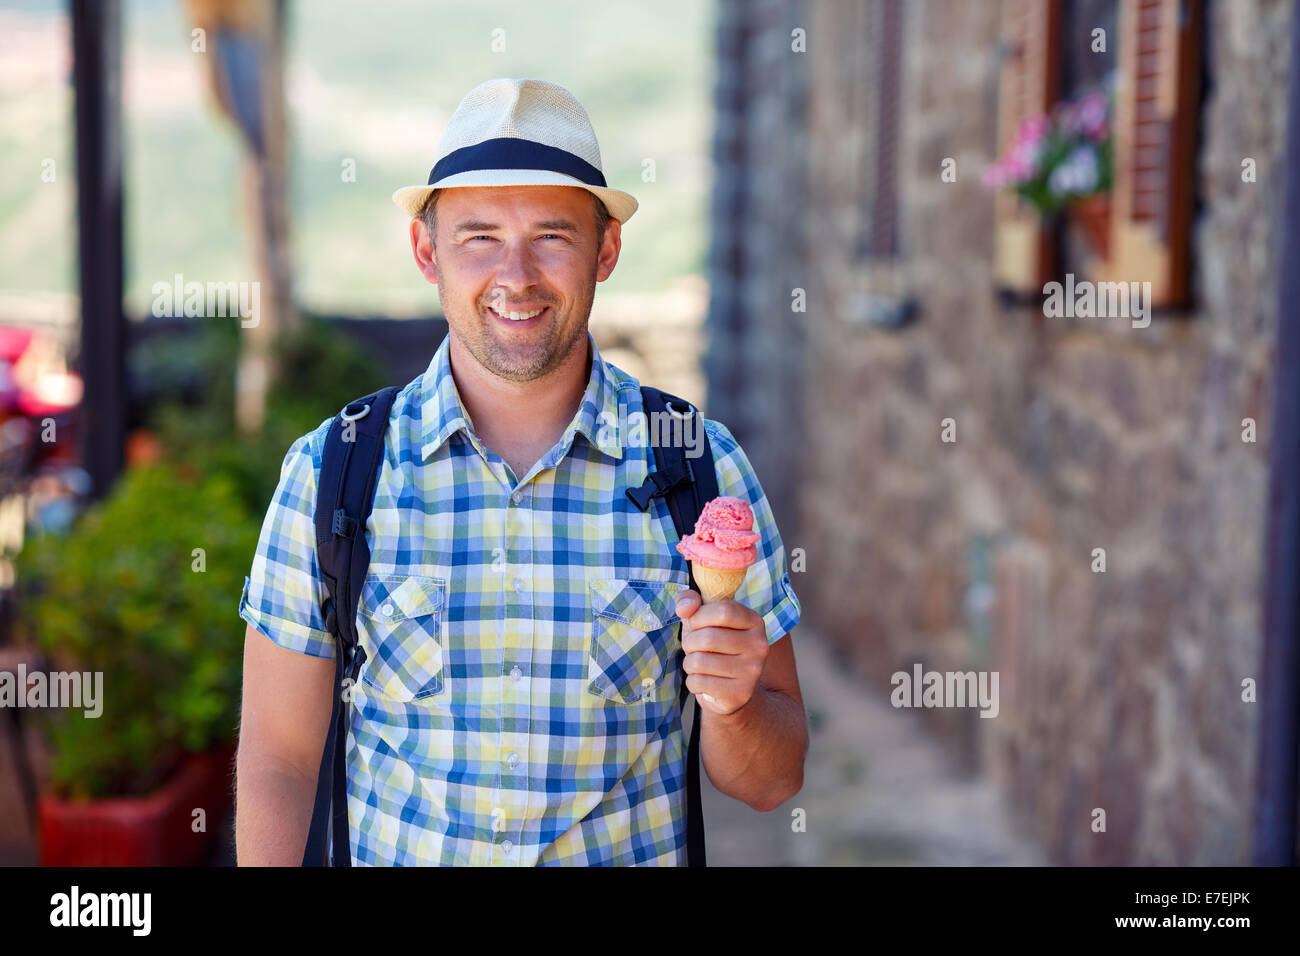 Happy young man holding ice cream Banque D'Images